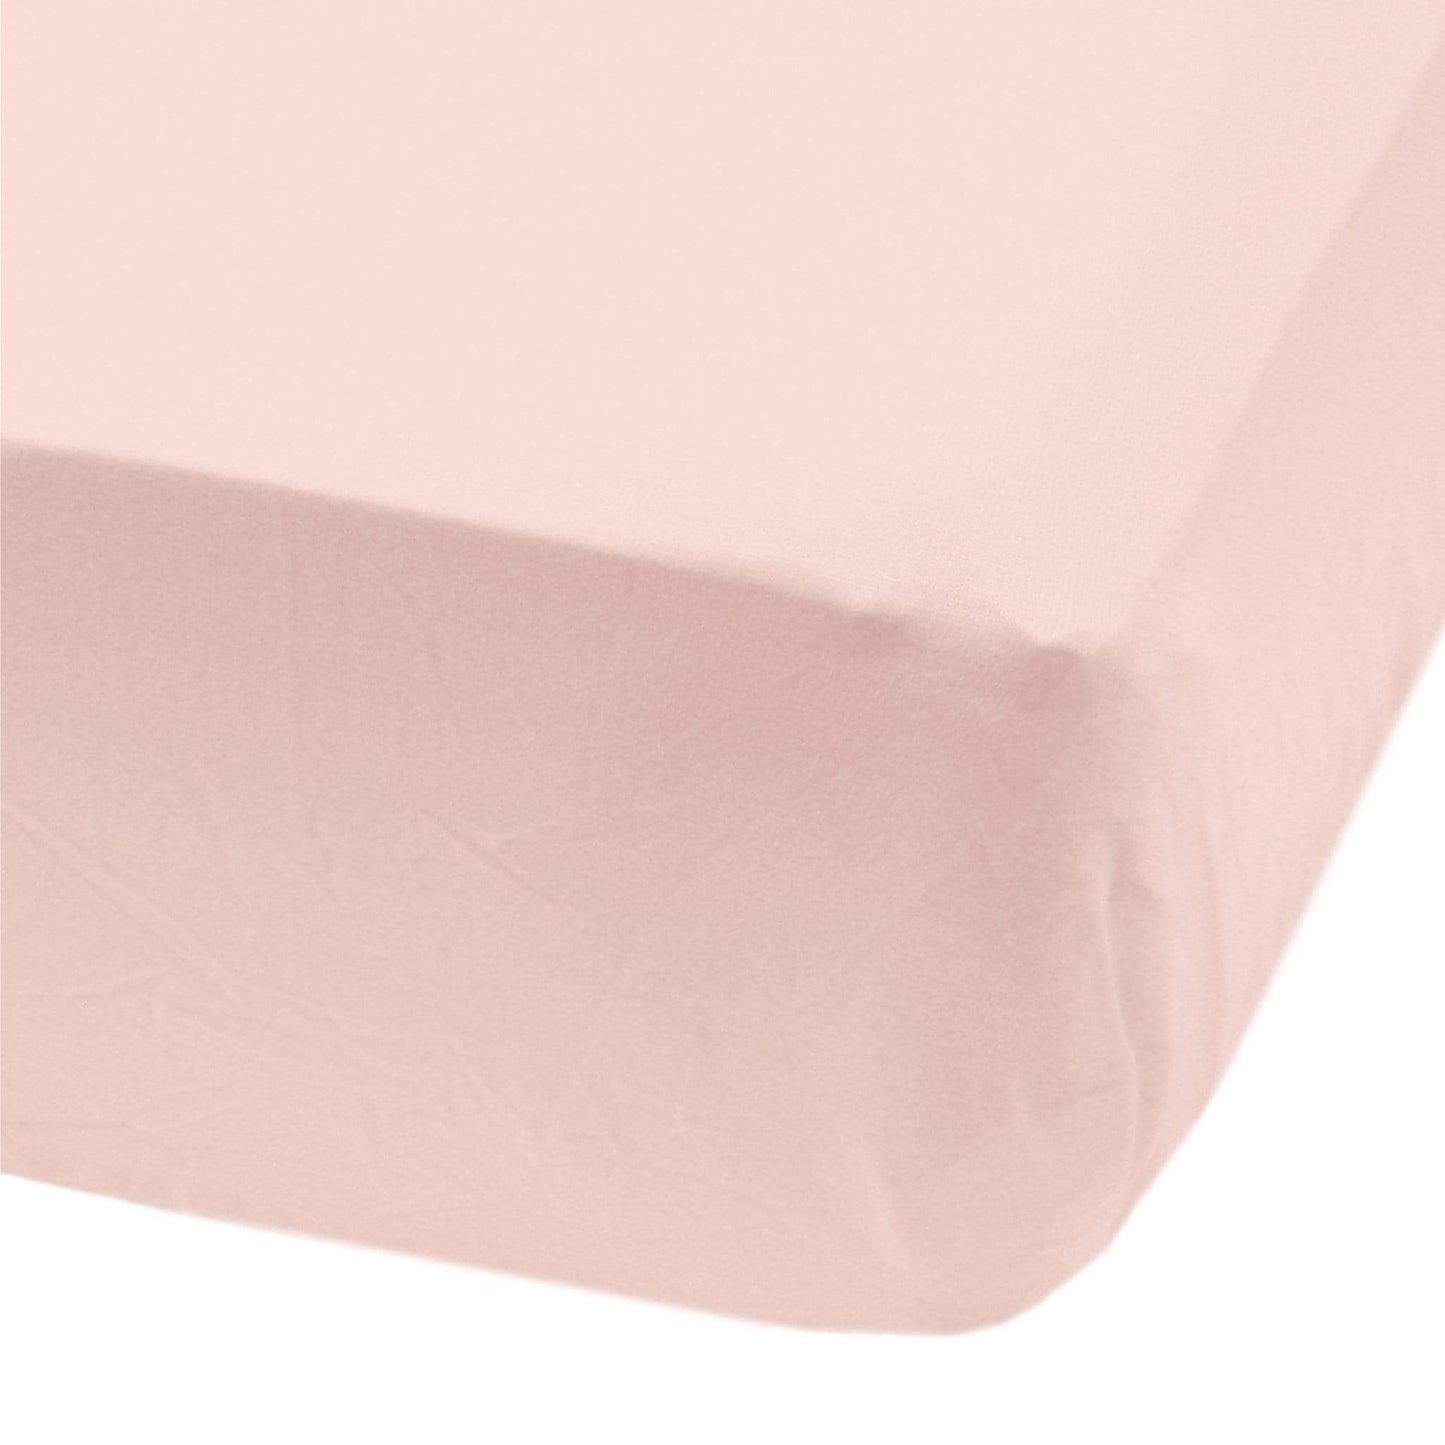 Crib fitted sheet - Npink